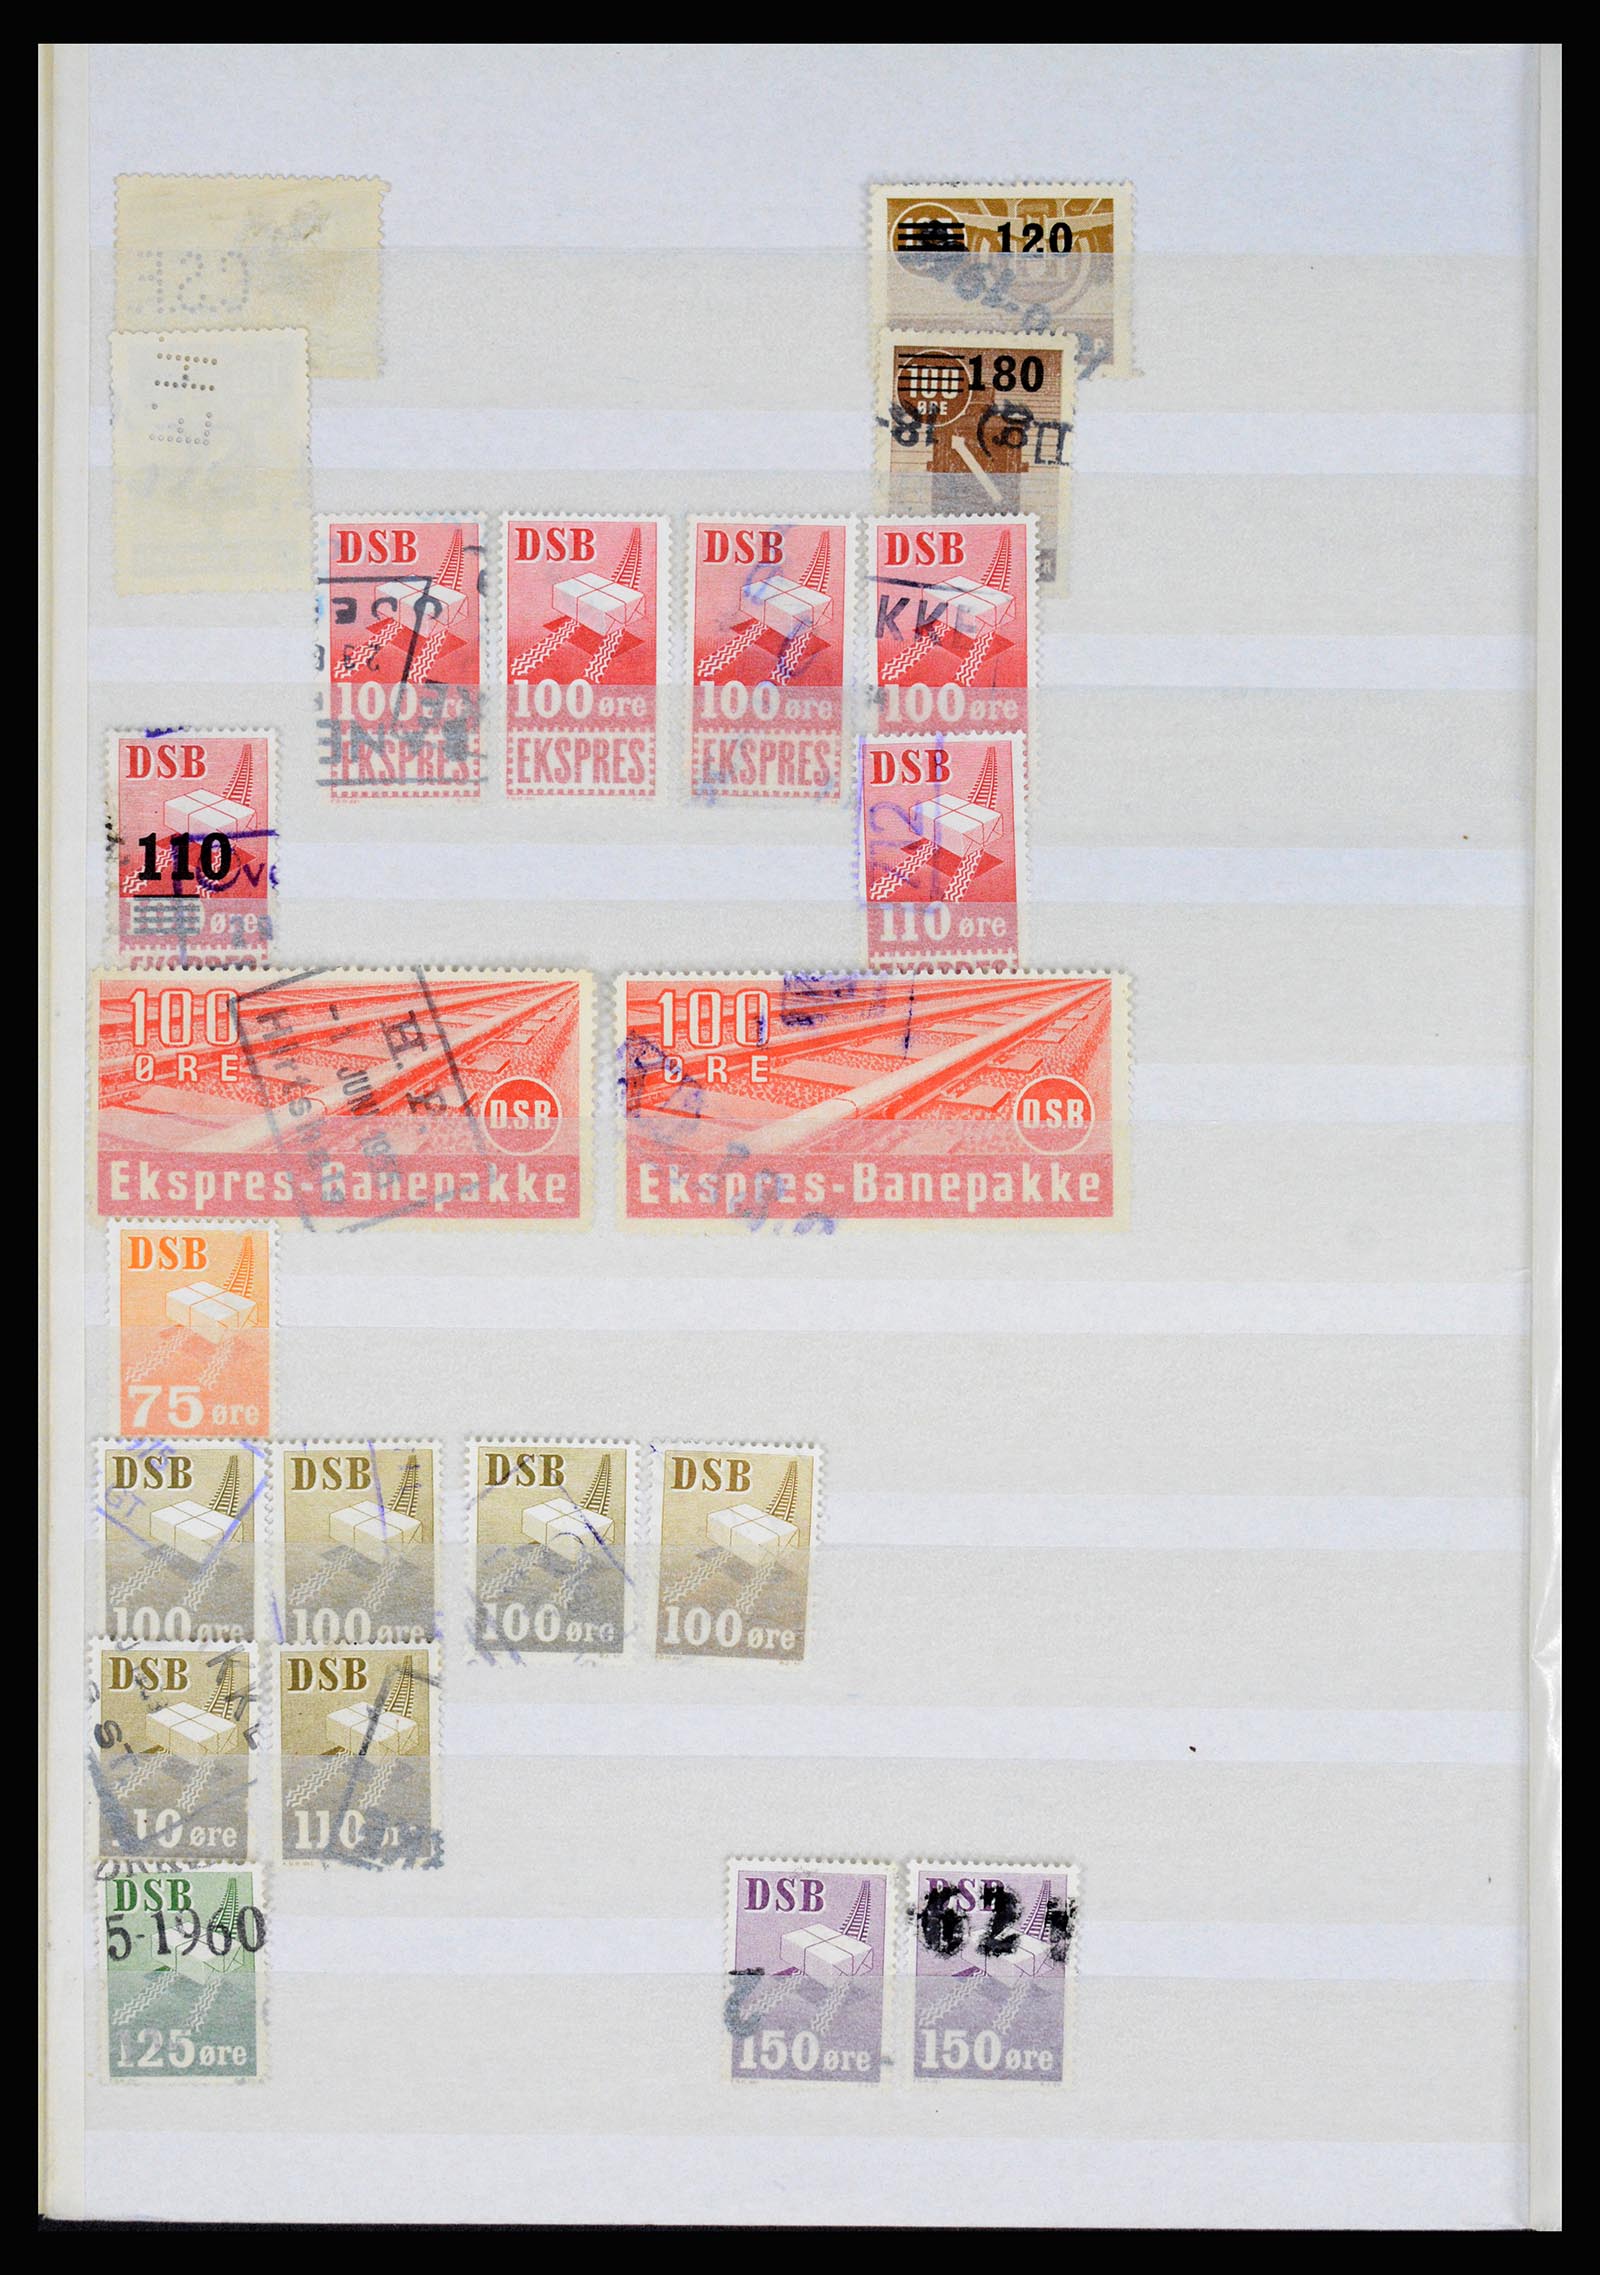 36982 010 - Stamp collection 36982 Denmark railroad stamps.